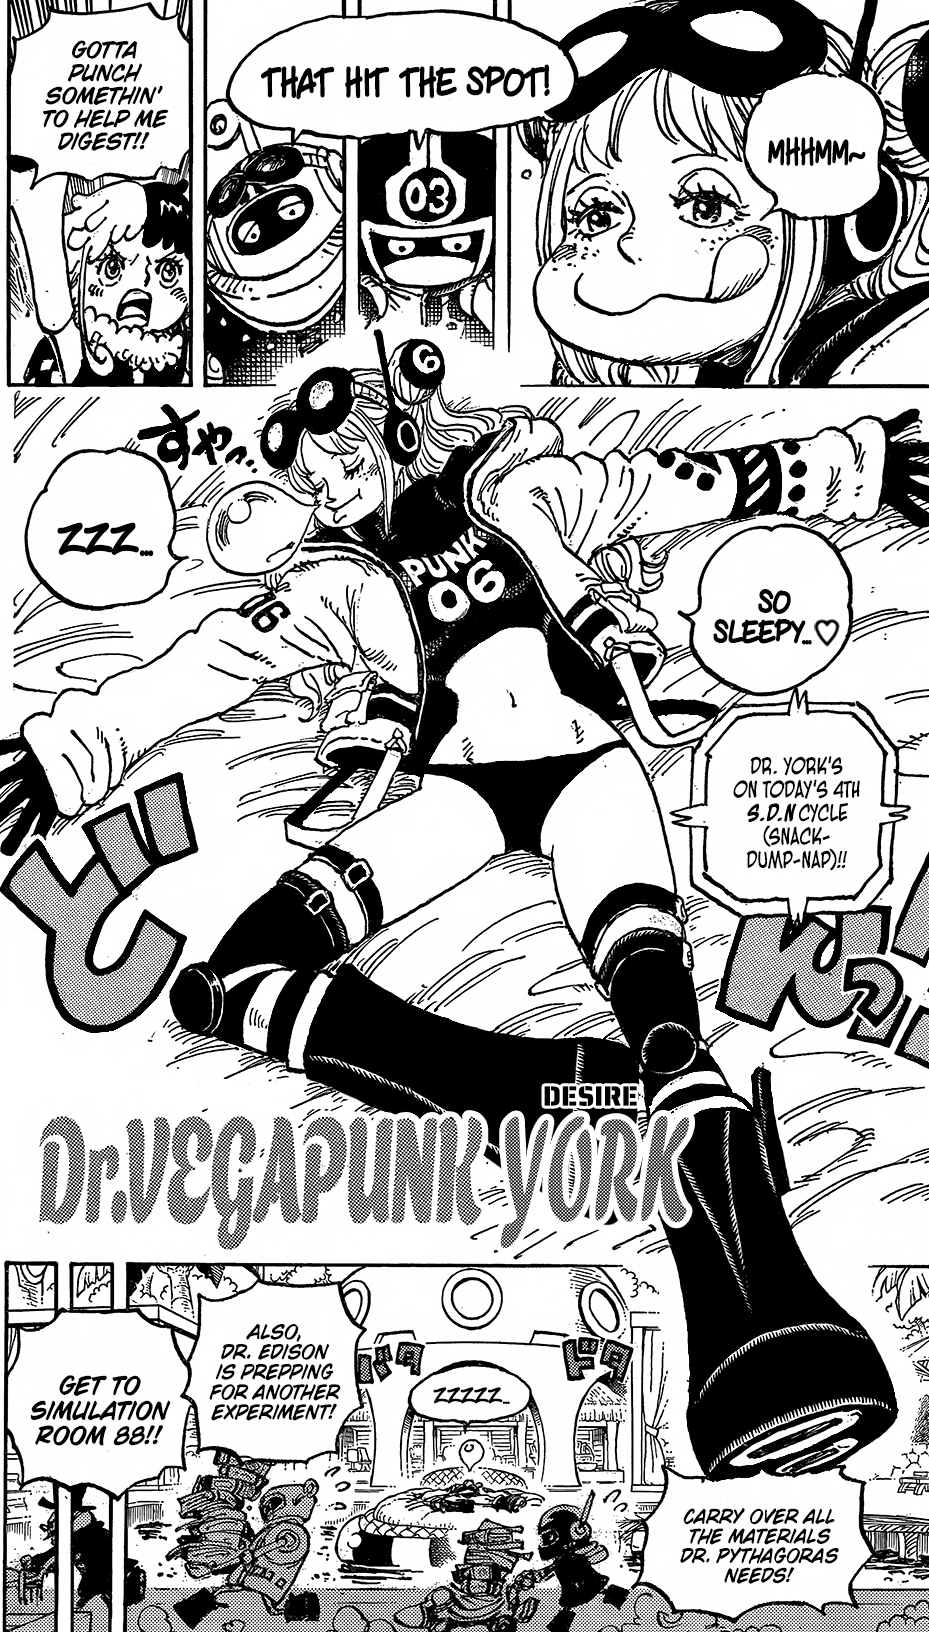 One Piece chapter 1065 spoiler finally reveals VegaPunk in all his glory